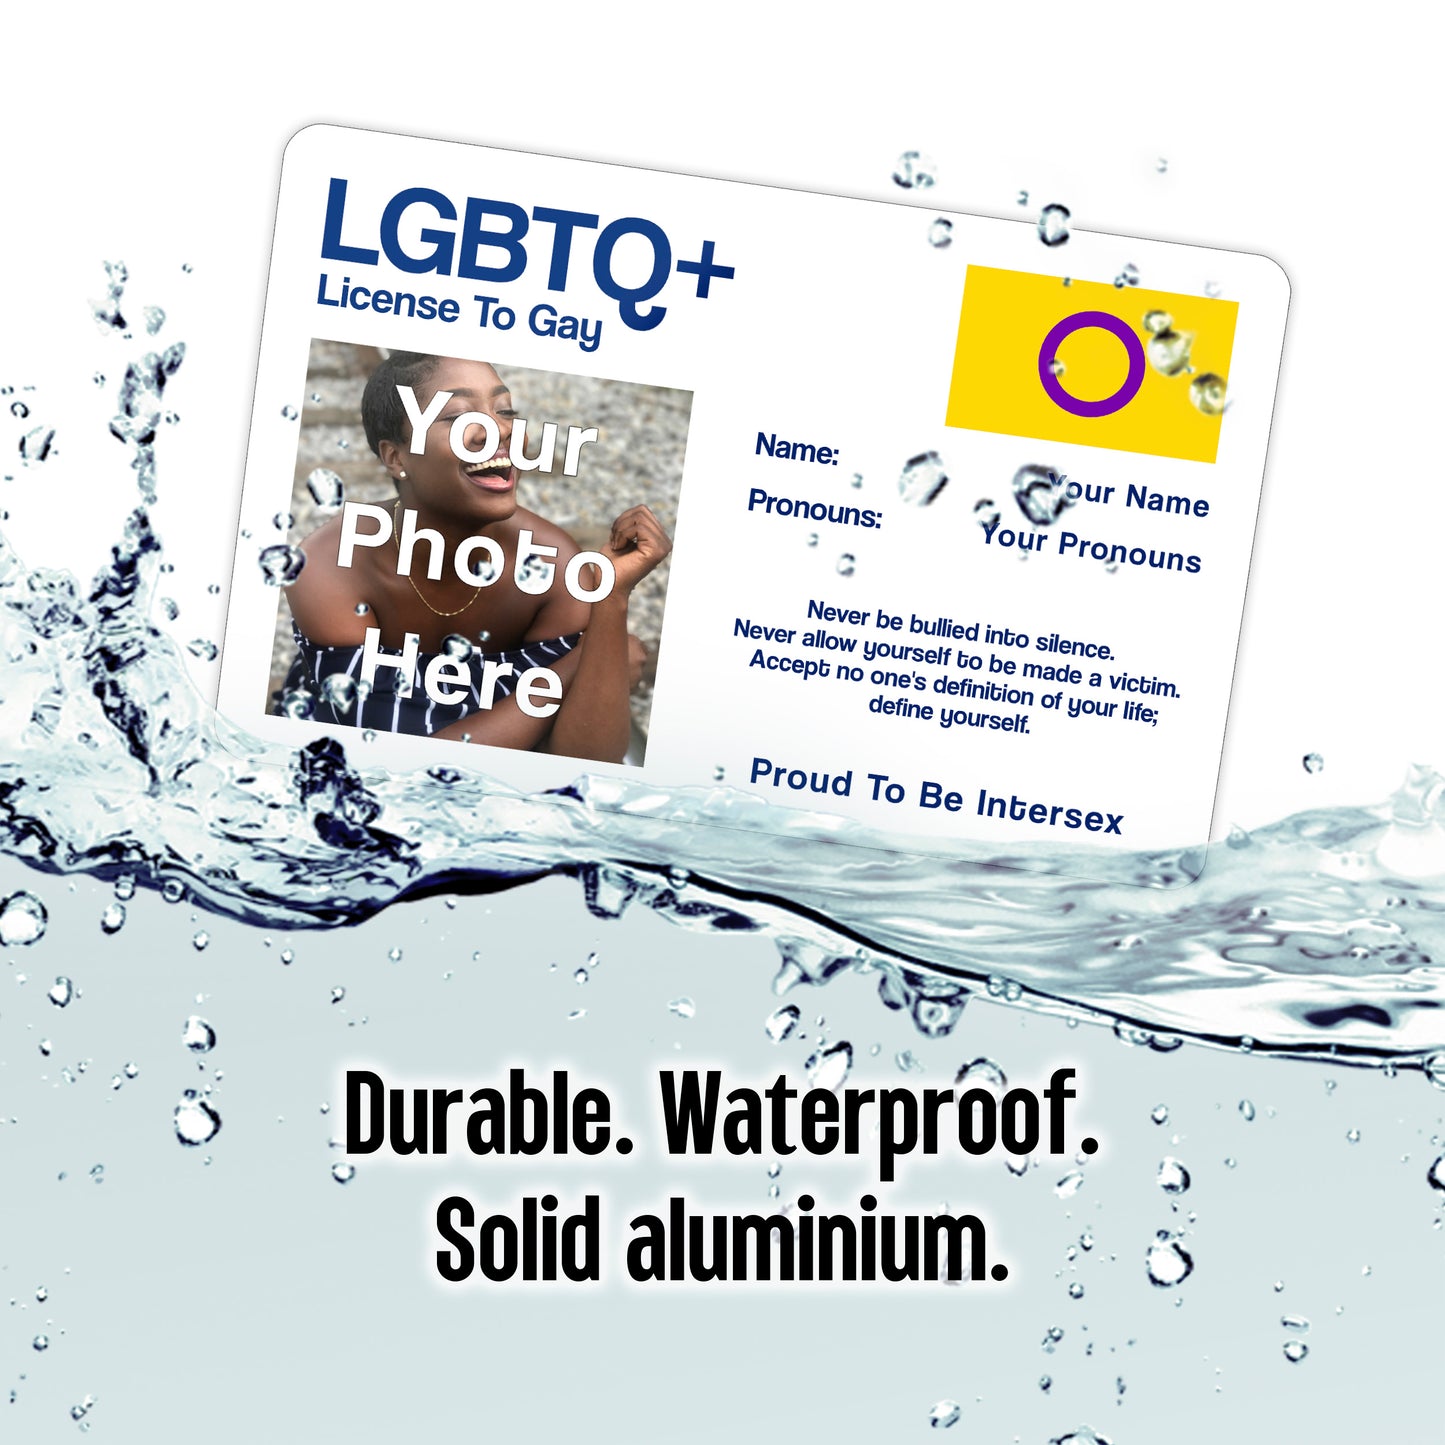 Intersex license to gay aluminium card personalised with your name, pronouns, and photo